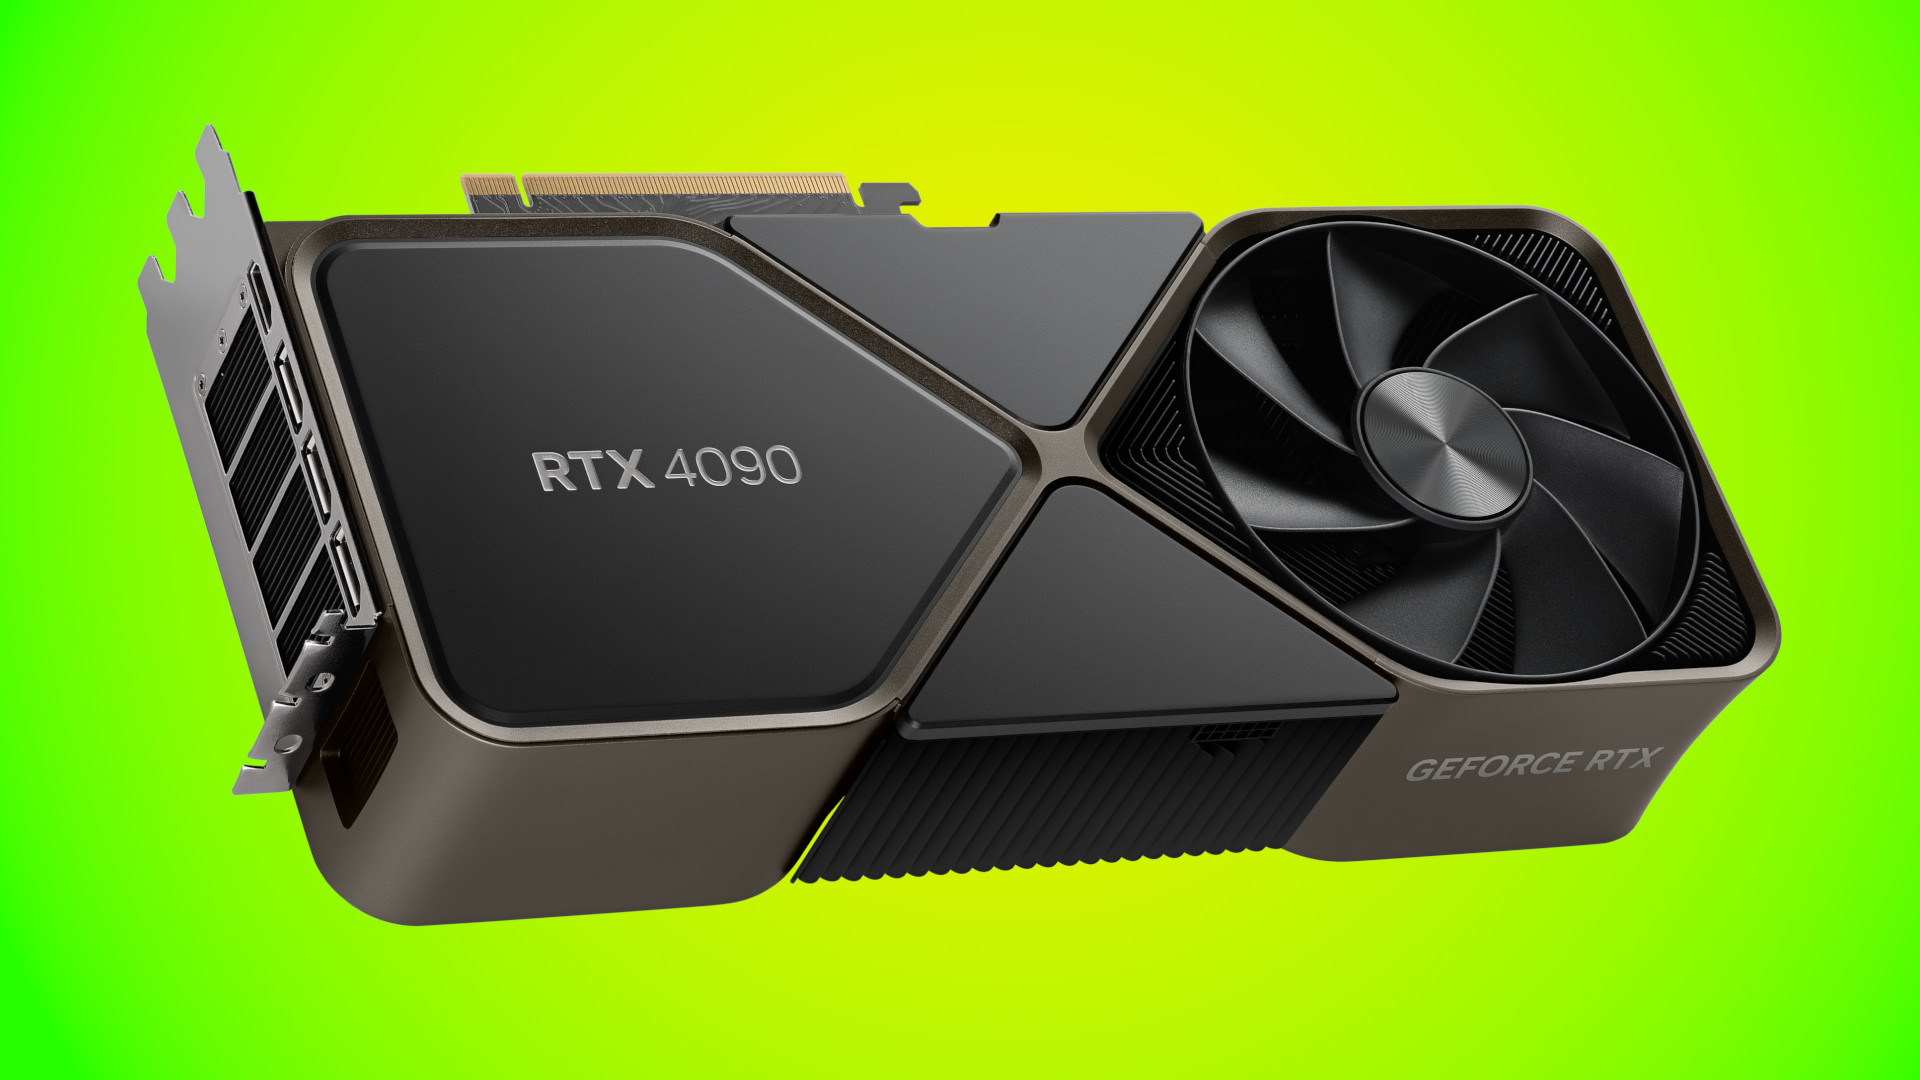 Nvidia RTX 4090 officially asks for 850W, but your PC may need more